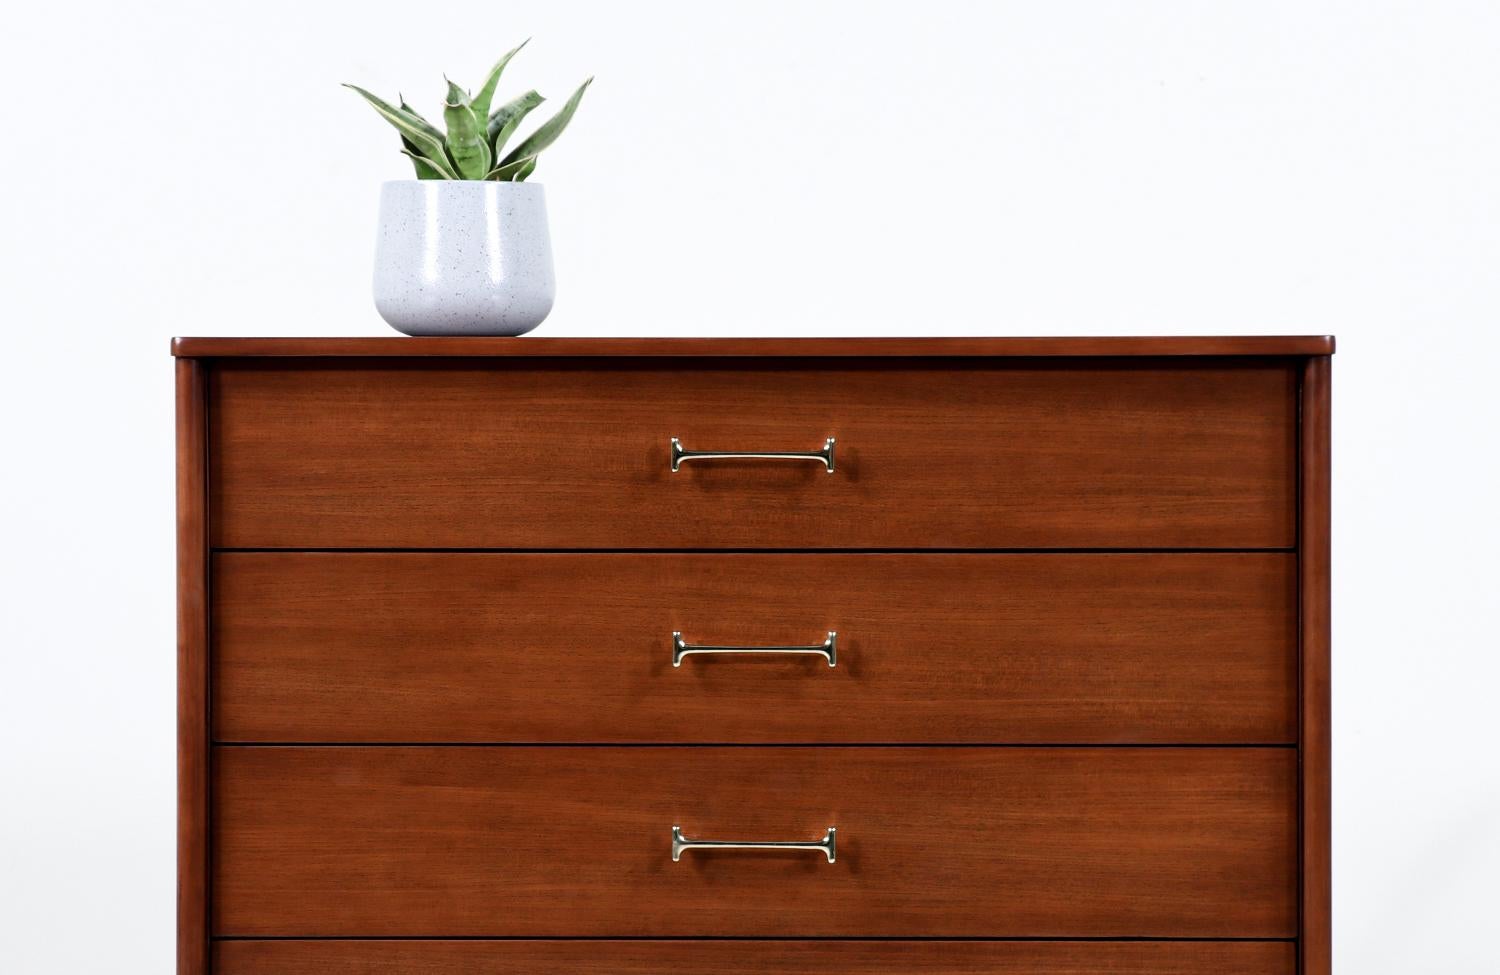 Mid-20th Century Milo Baughman Walnut Chest of Drawers with Brass Handles for Drexel